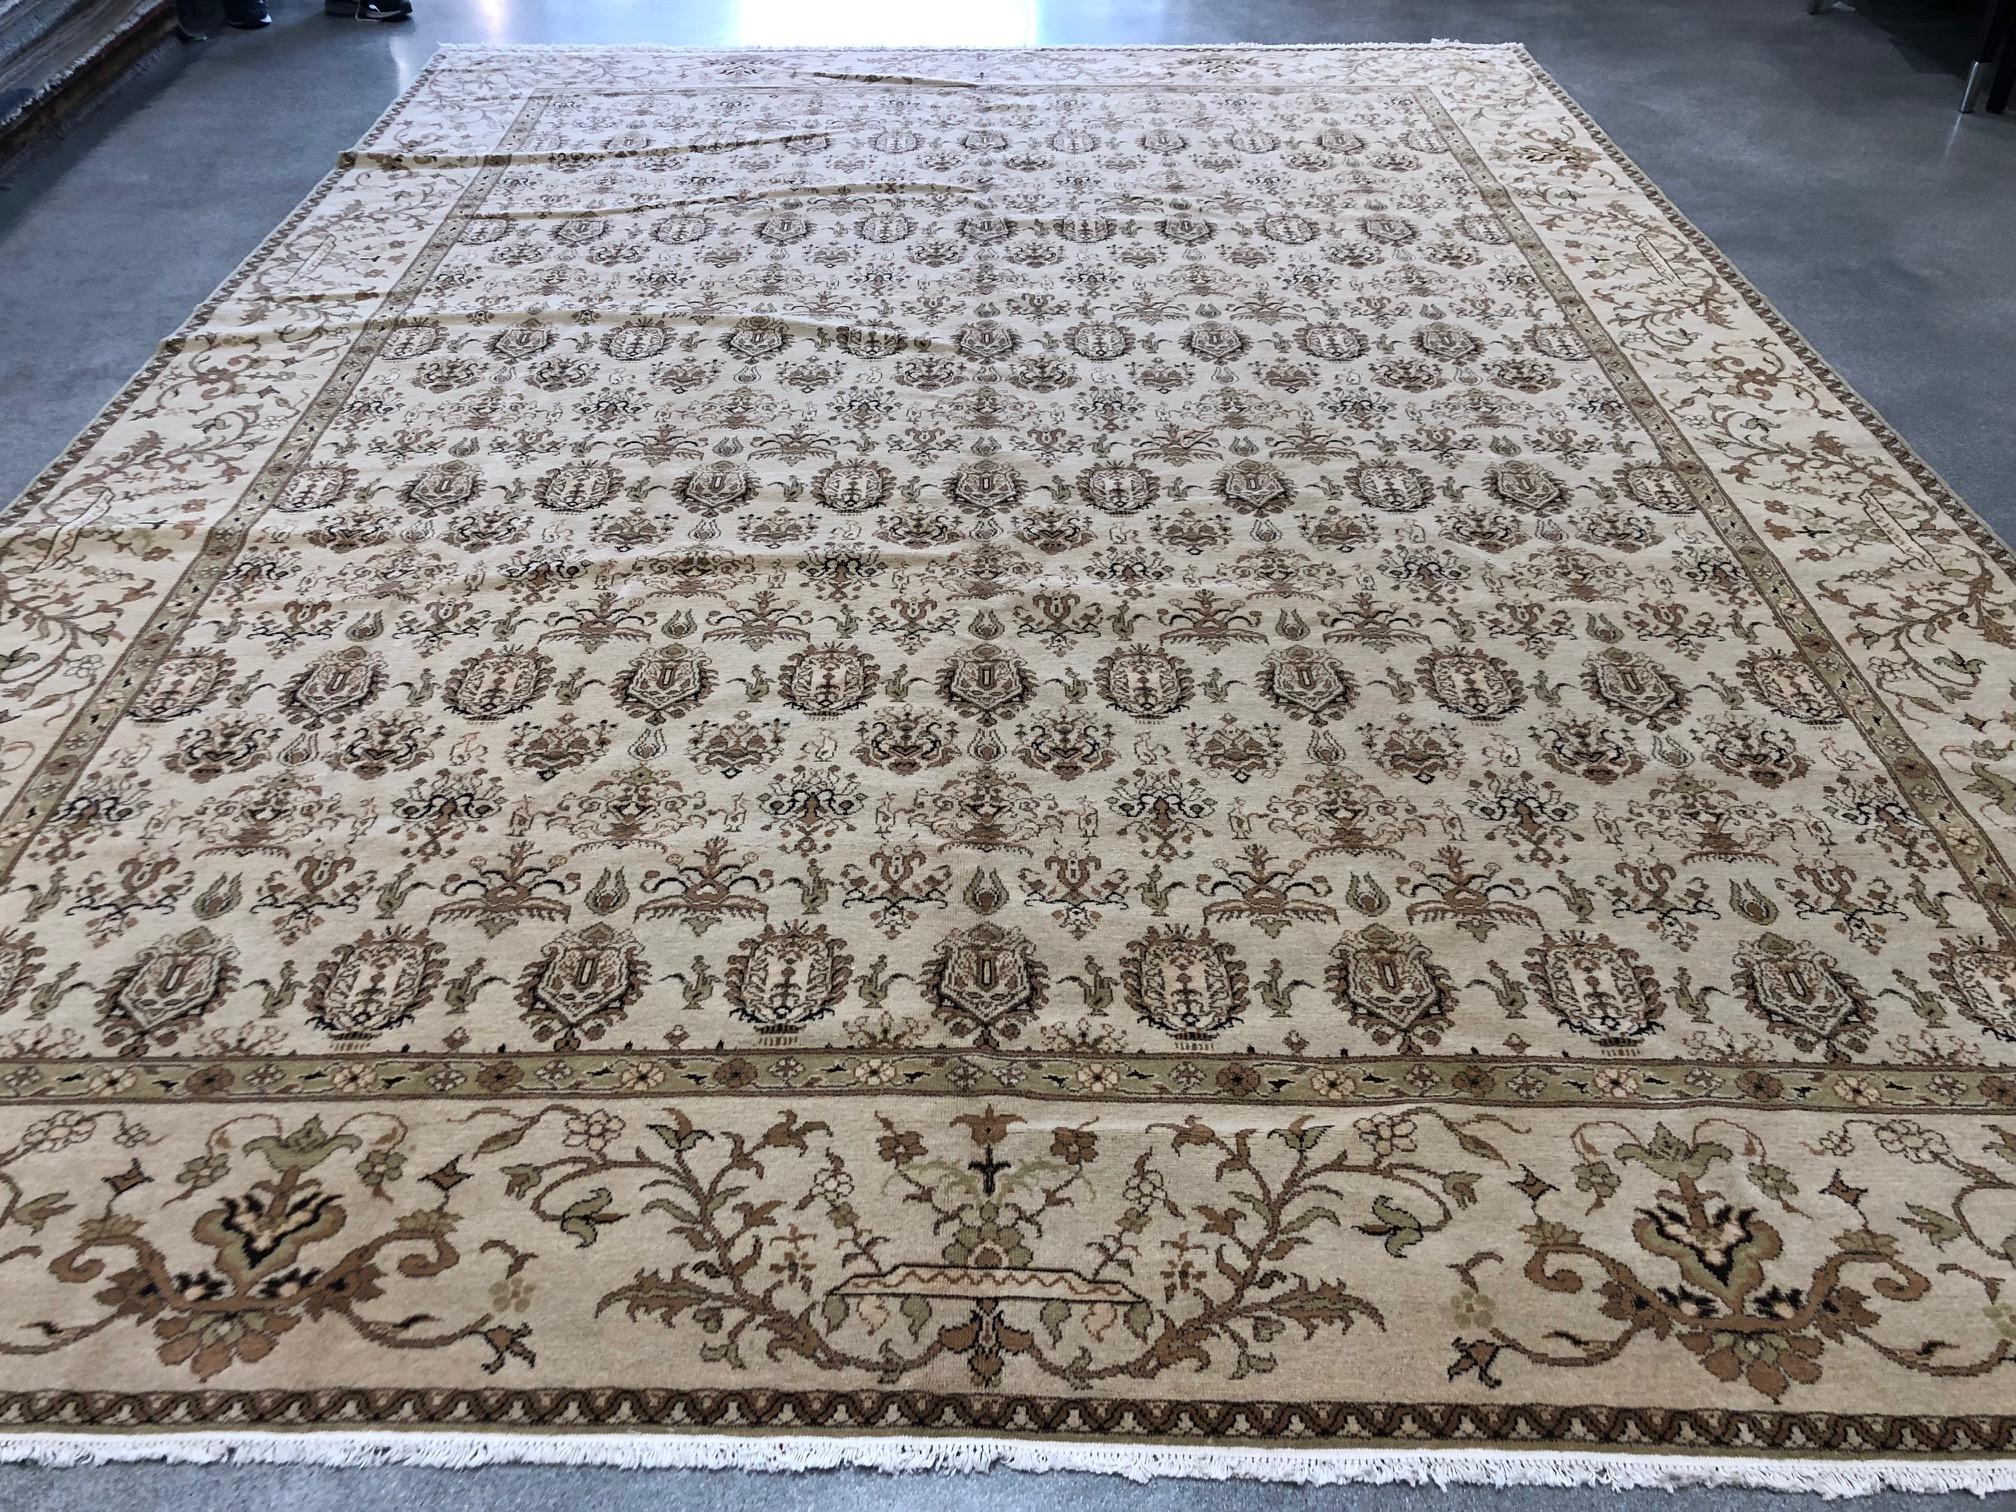 From the popular European Design collection comes a traditional style area rug with contemporary colors and styling. The large center panel features a unique pattern that combines floral and animal motifs in a style that brings to mind a family